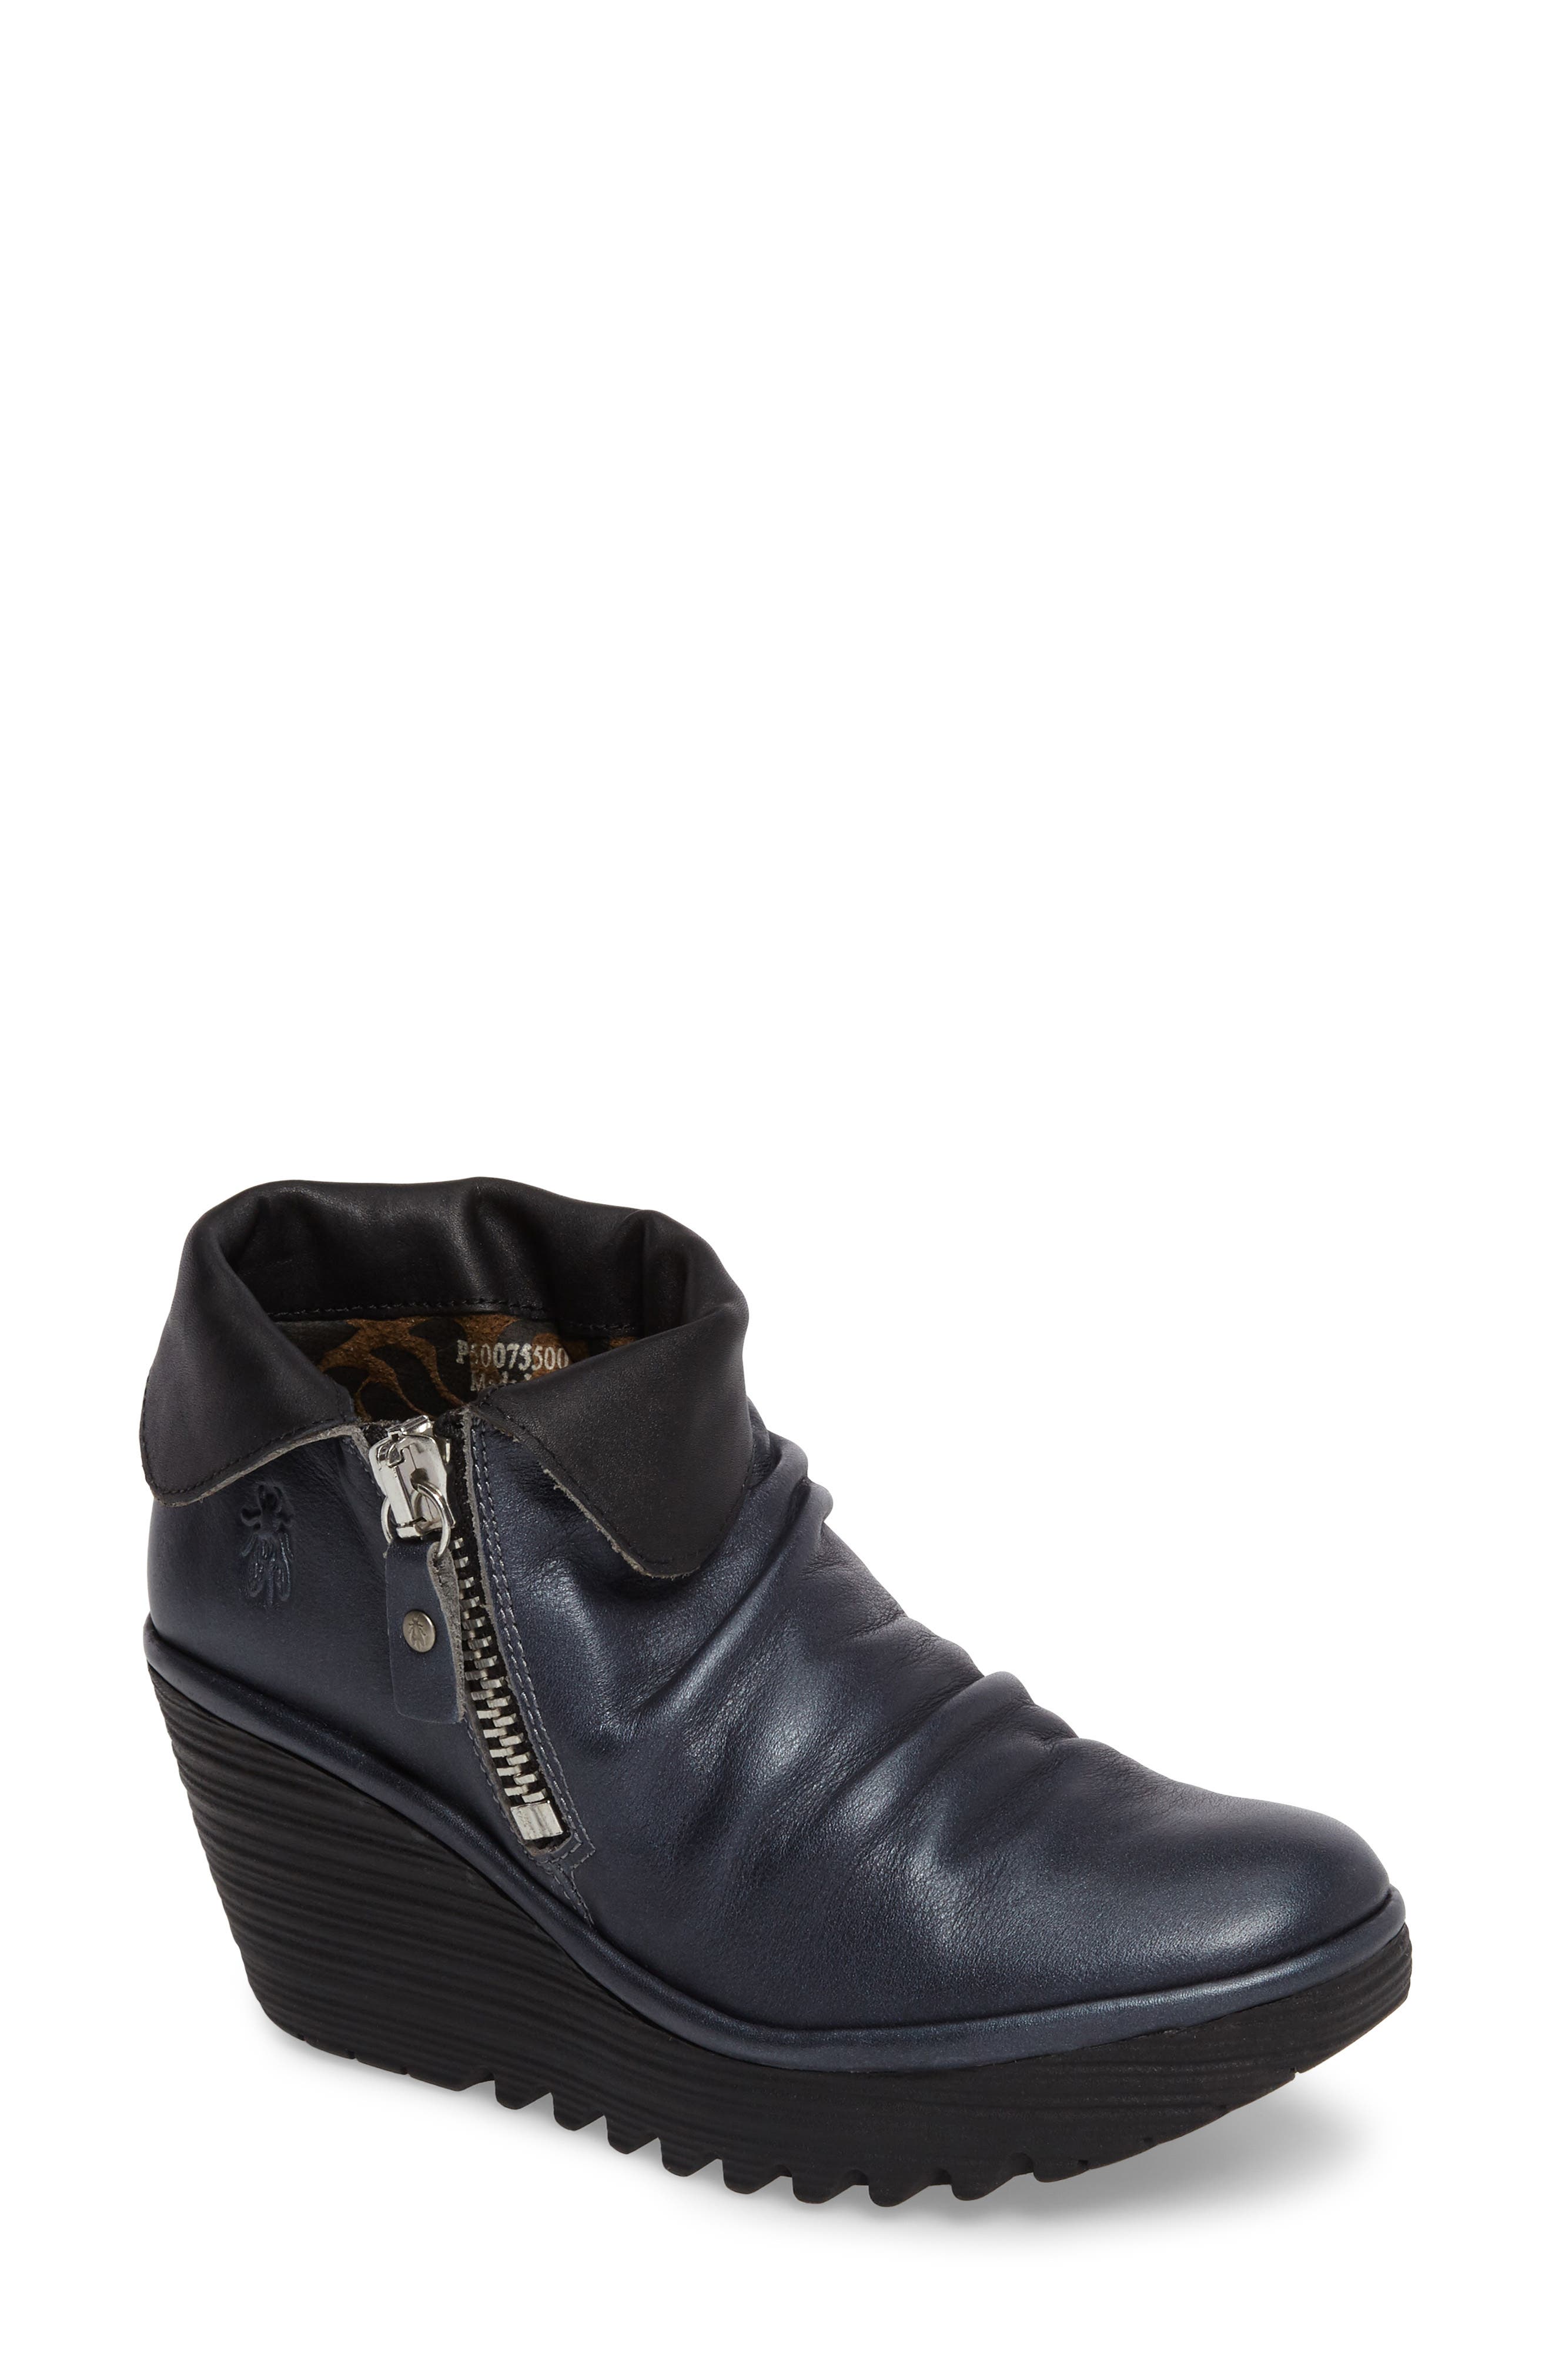 FLY London | Yoxi Wedge Bootie 